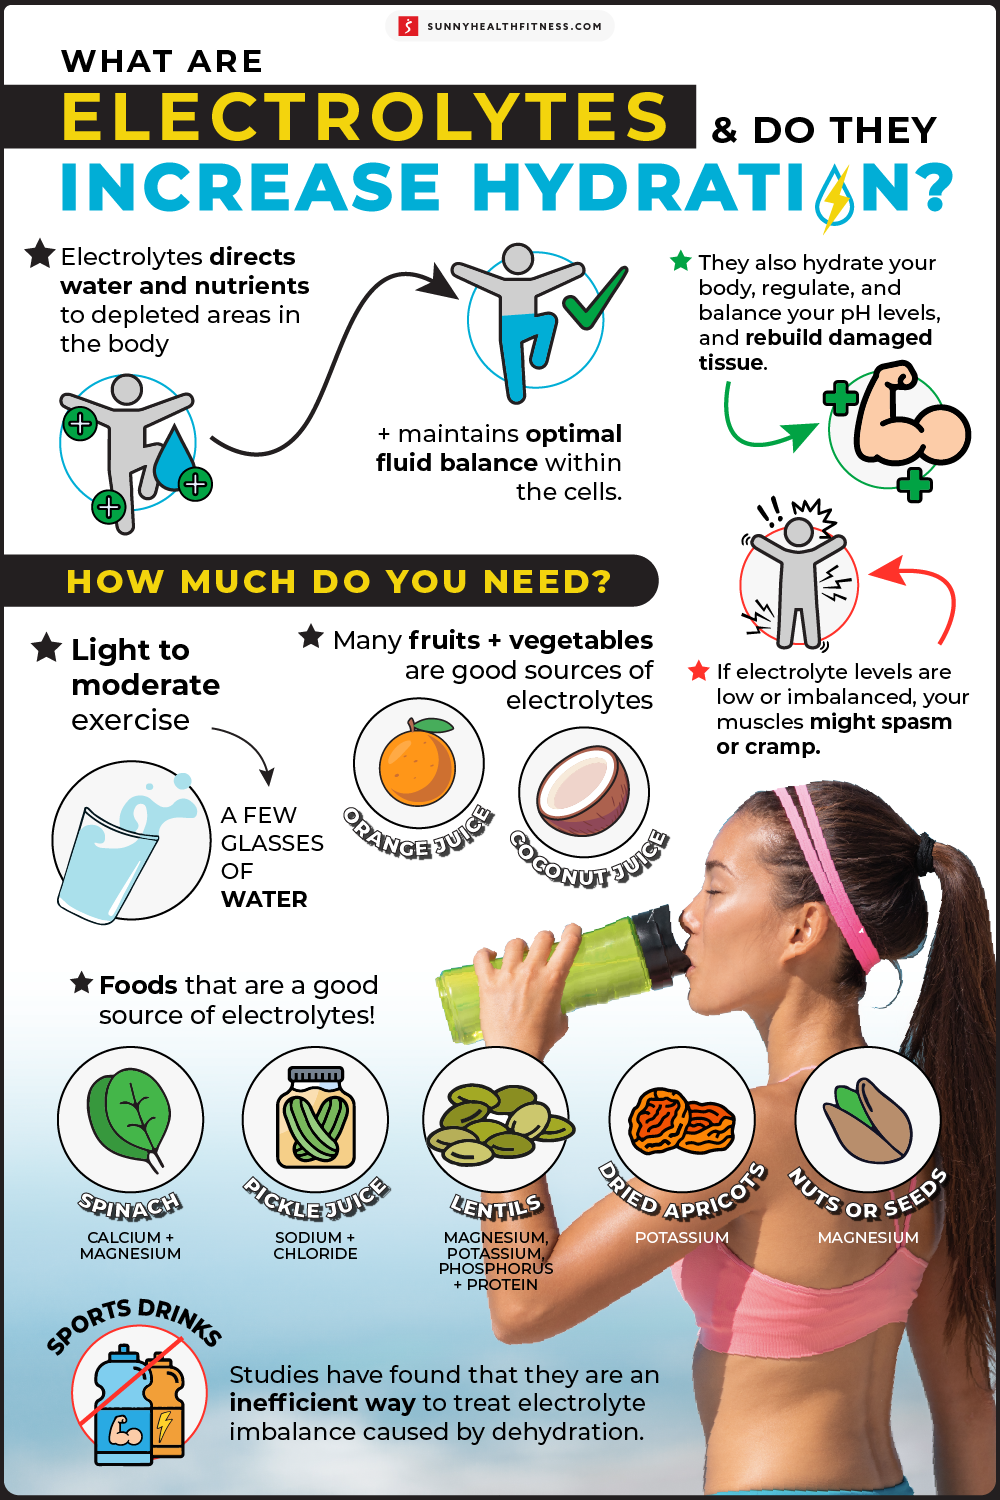 How to Incorporate Electrolytes Into Your Diet Naturally